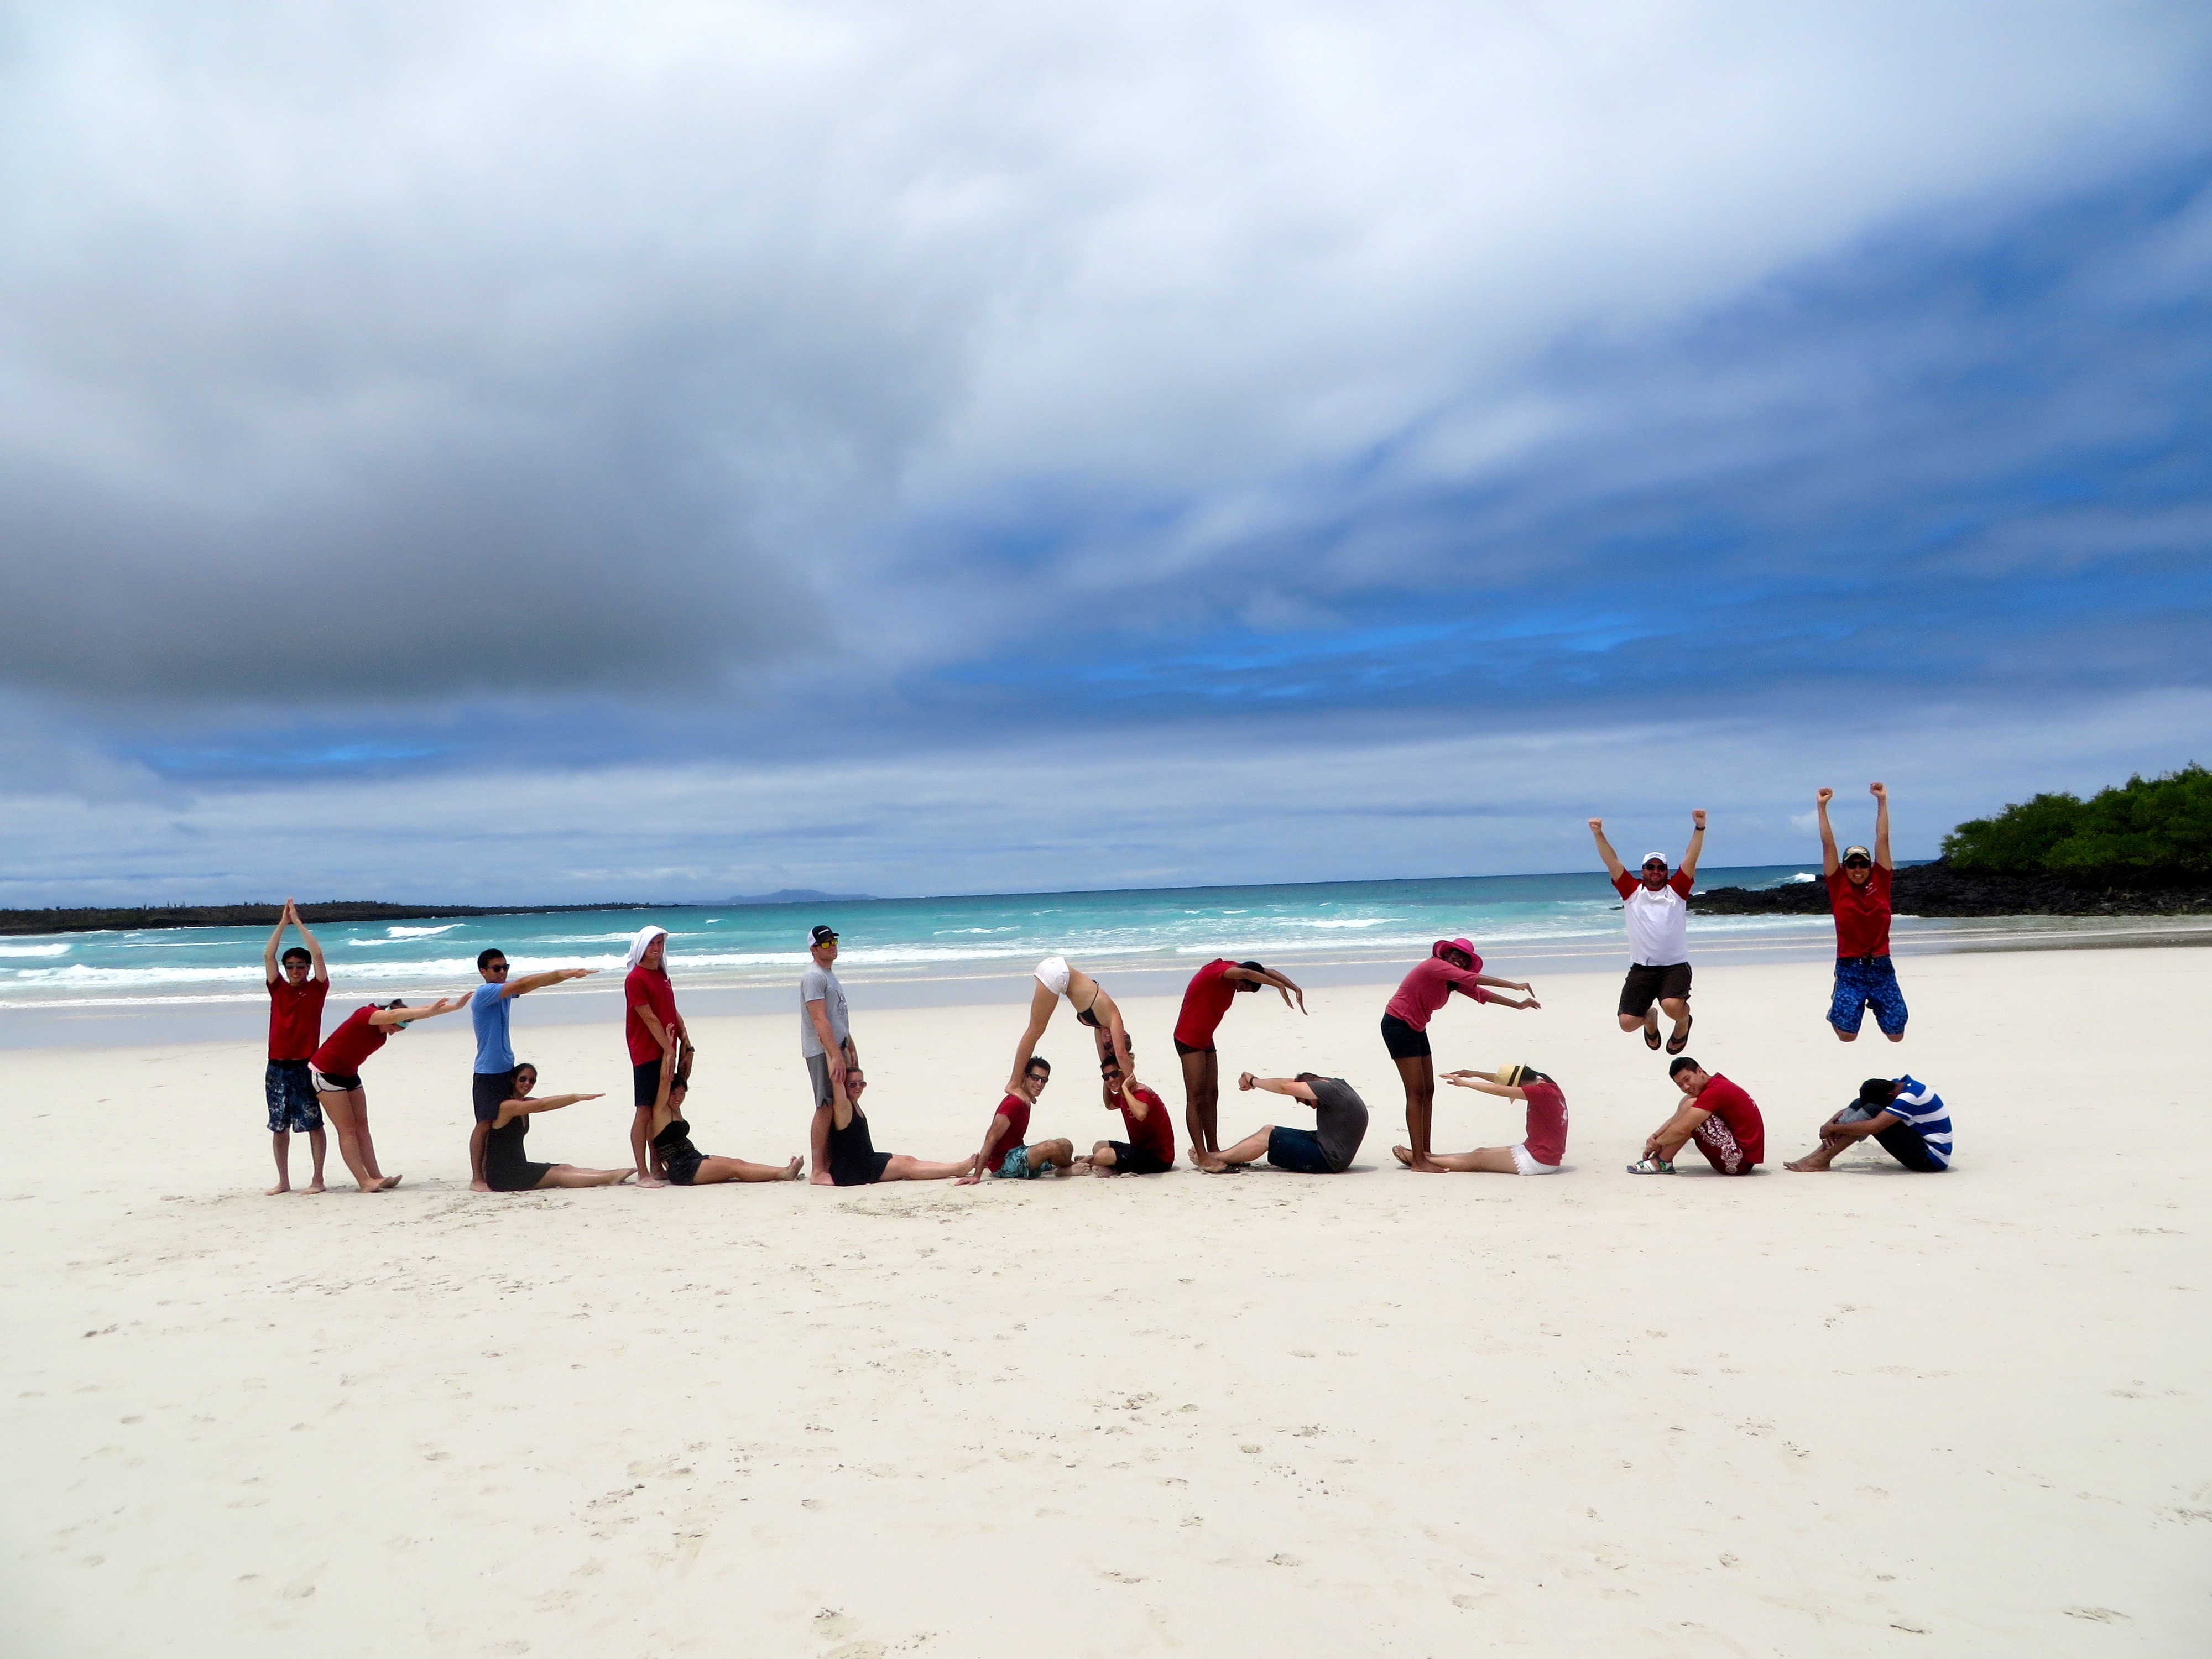 Students spell "Kellogg" with their bodies on a sandy beach.